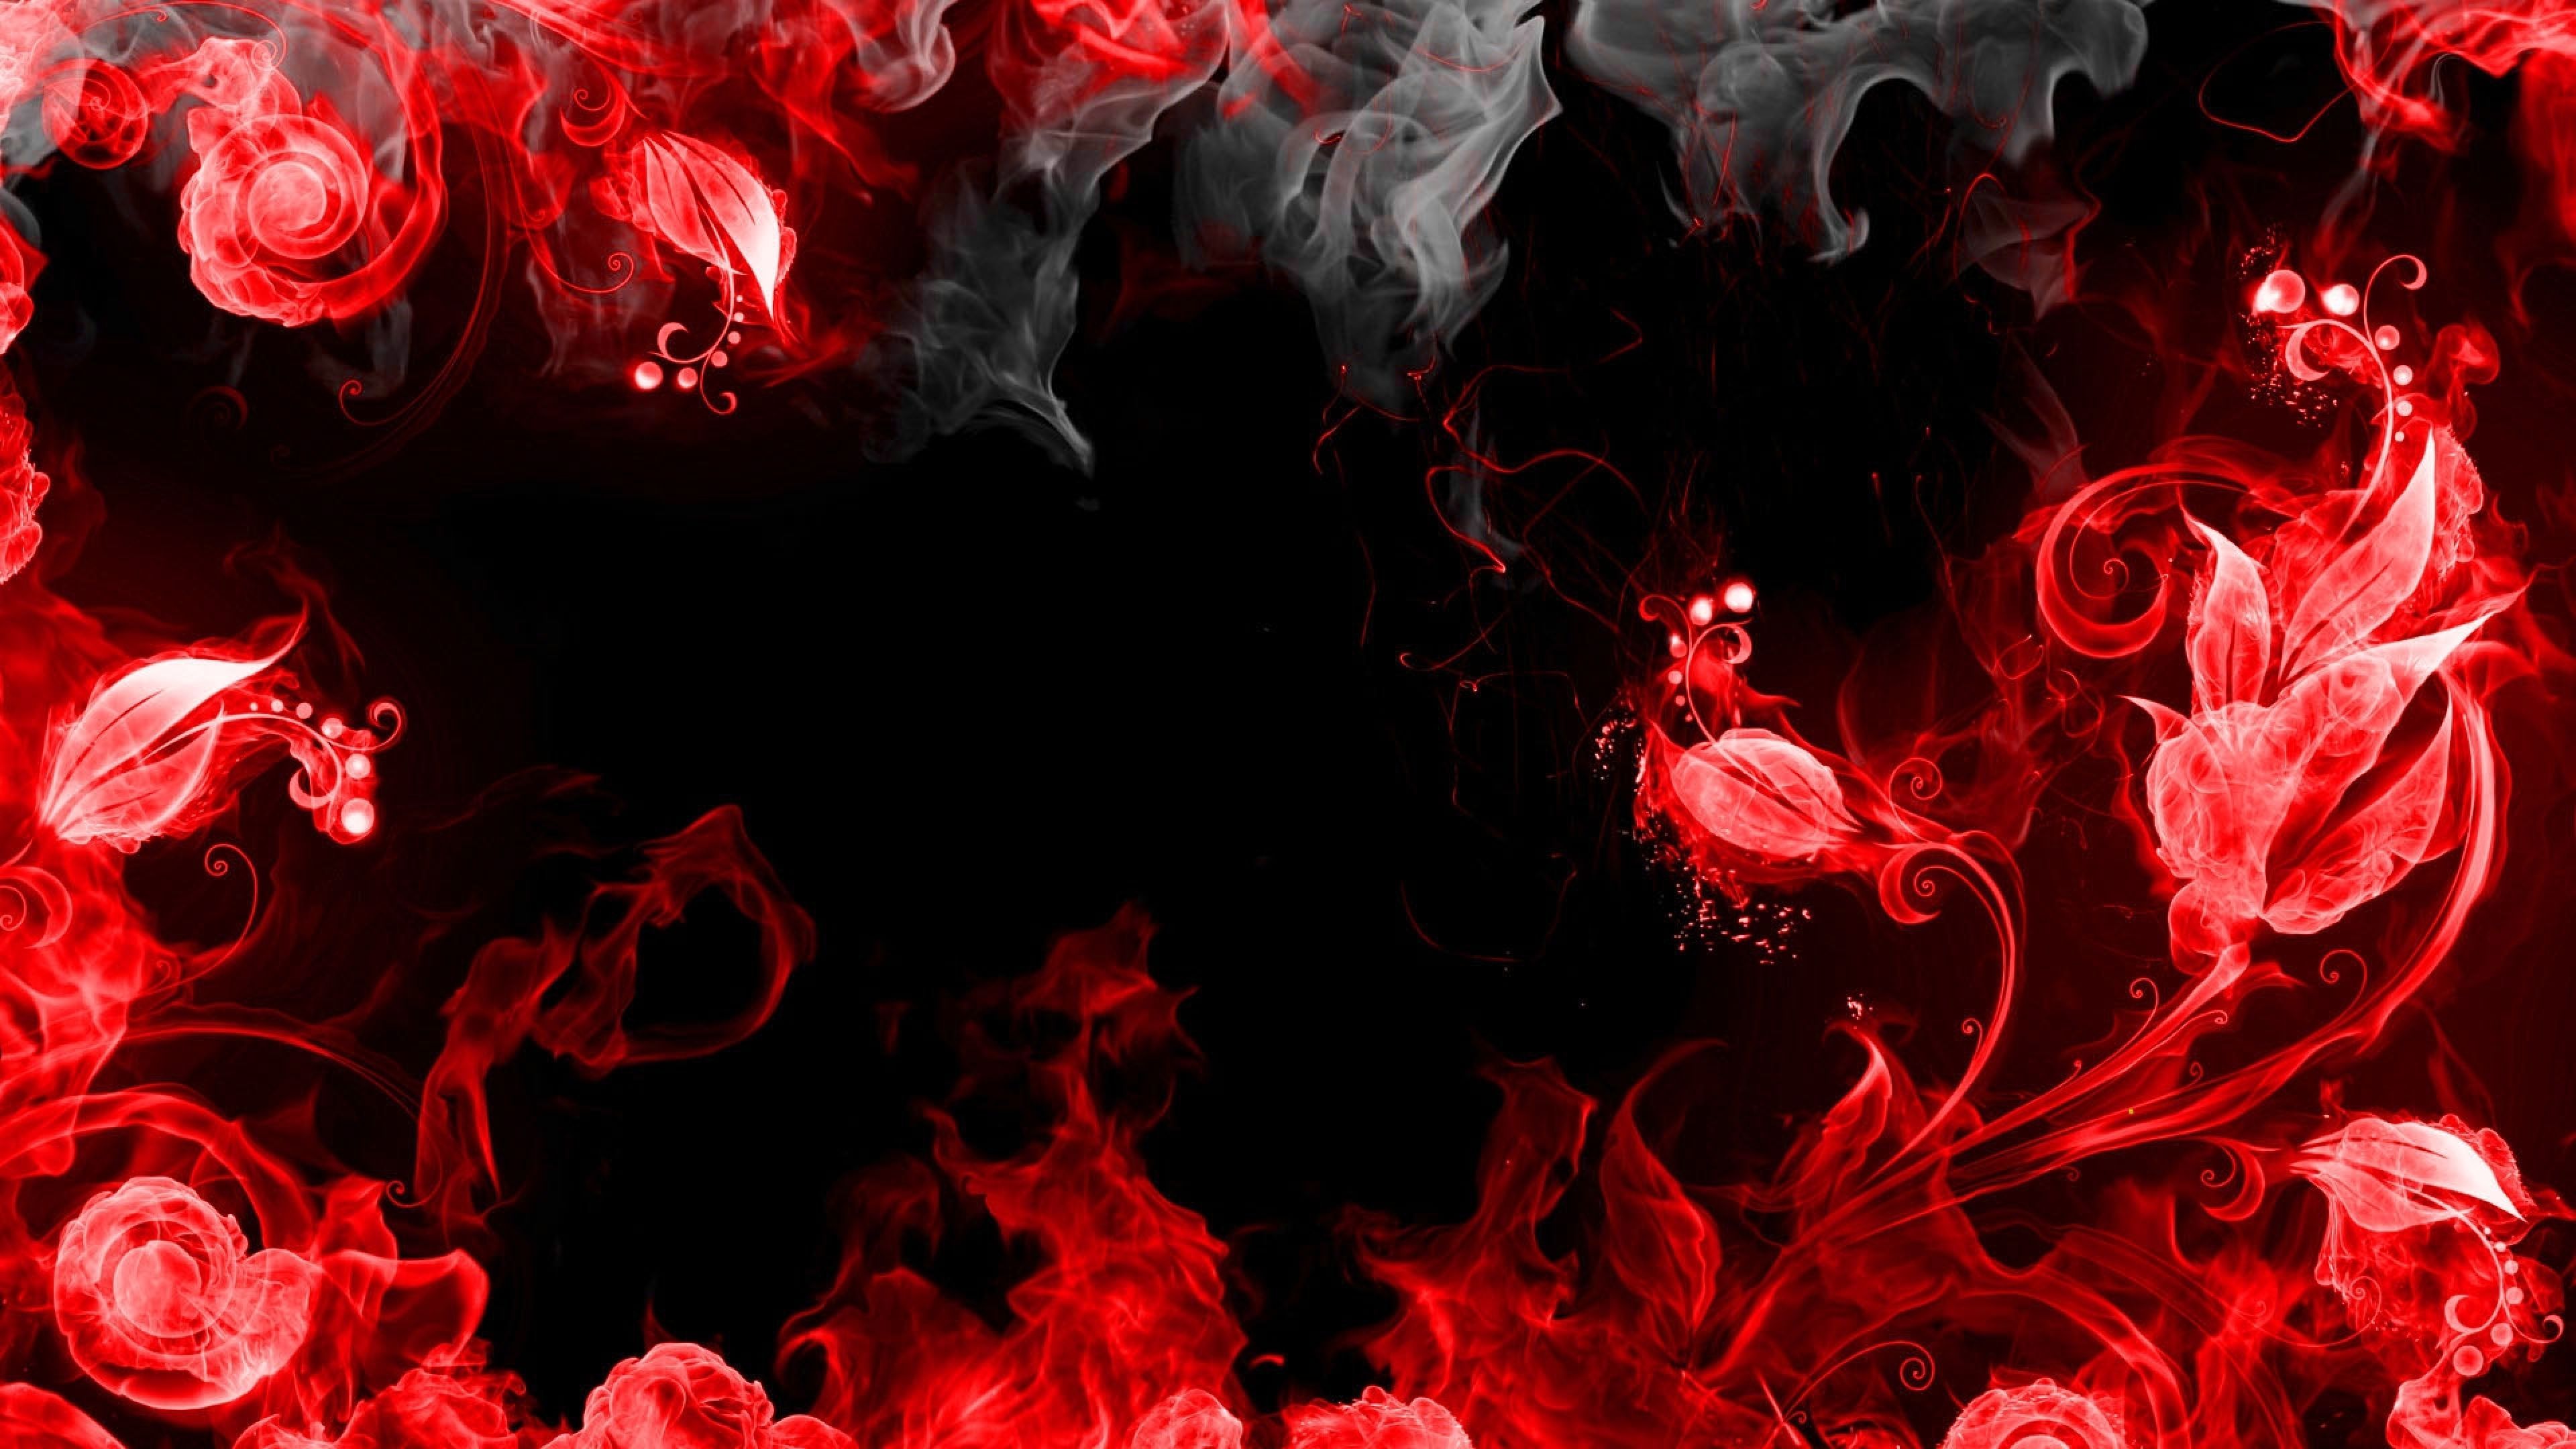 Smoke Photos Download The BEST Free Smoke Stock Photos  HD Images